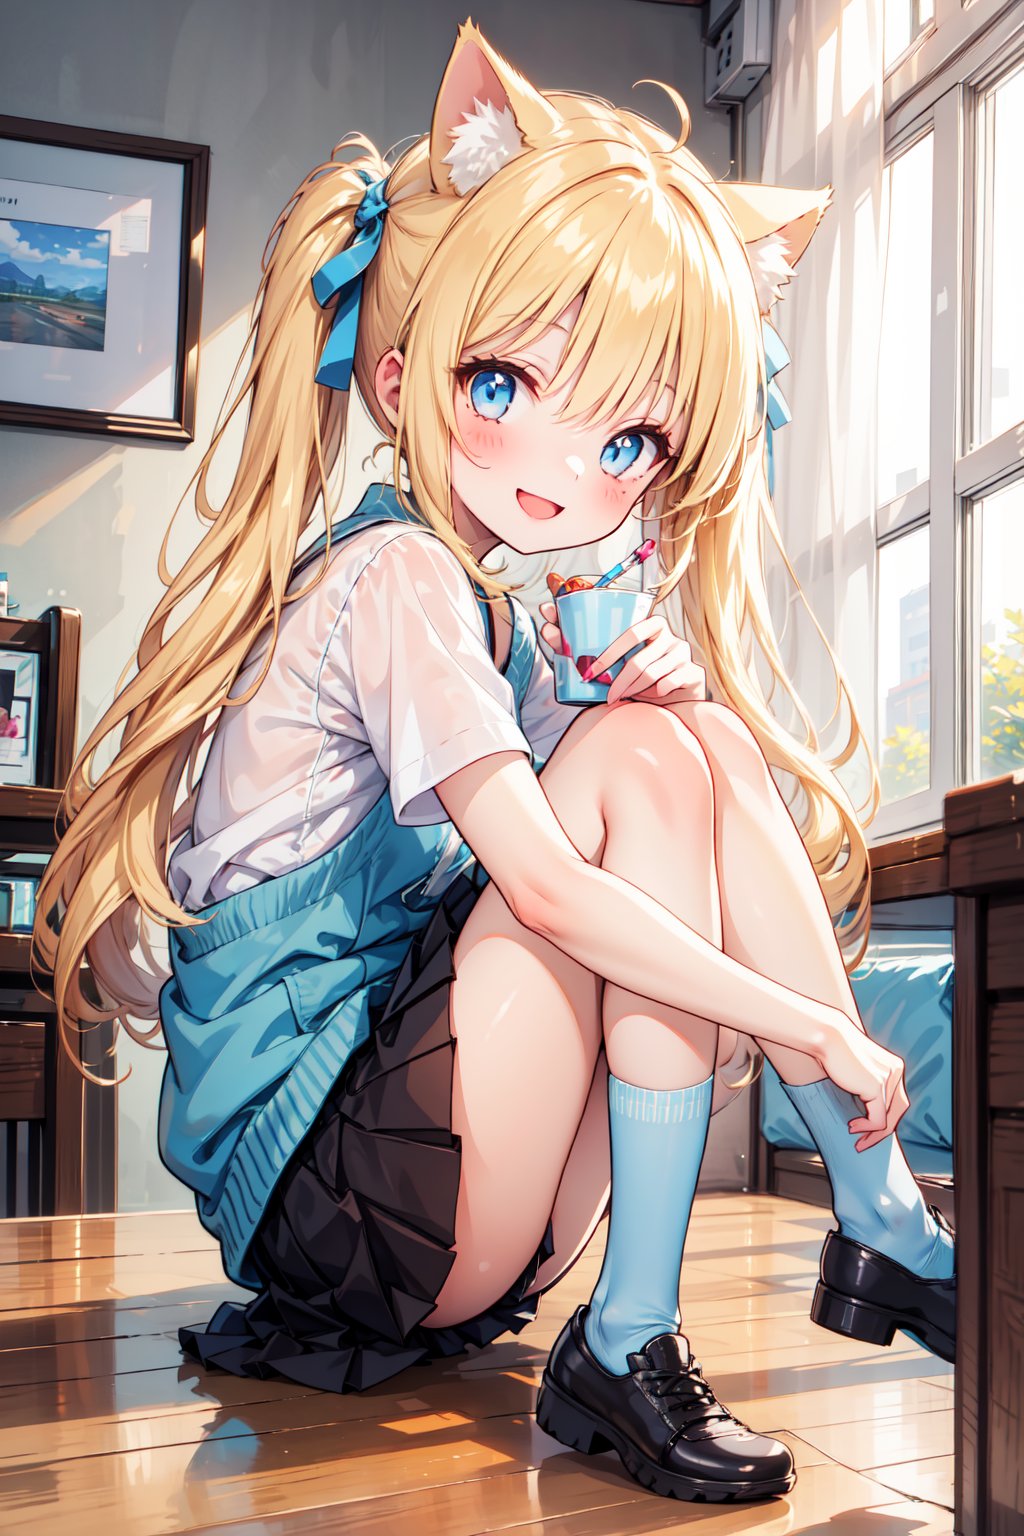 1girl, cute cat girl, room in background. she wears a light blue outfit (shirt, skirt), long blonde hair. little body, full body character. masterpiece. she is happy, smiling. twintails hairstyle, masterpiece, hearts on the sides. cat ears. looking at viewer, sitting over a table, Detailed